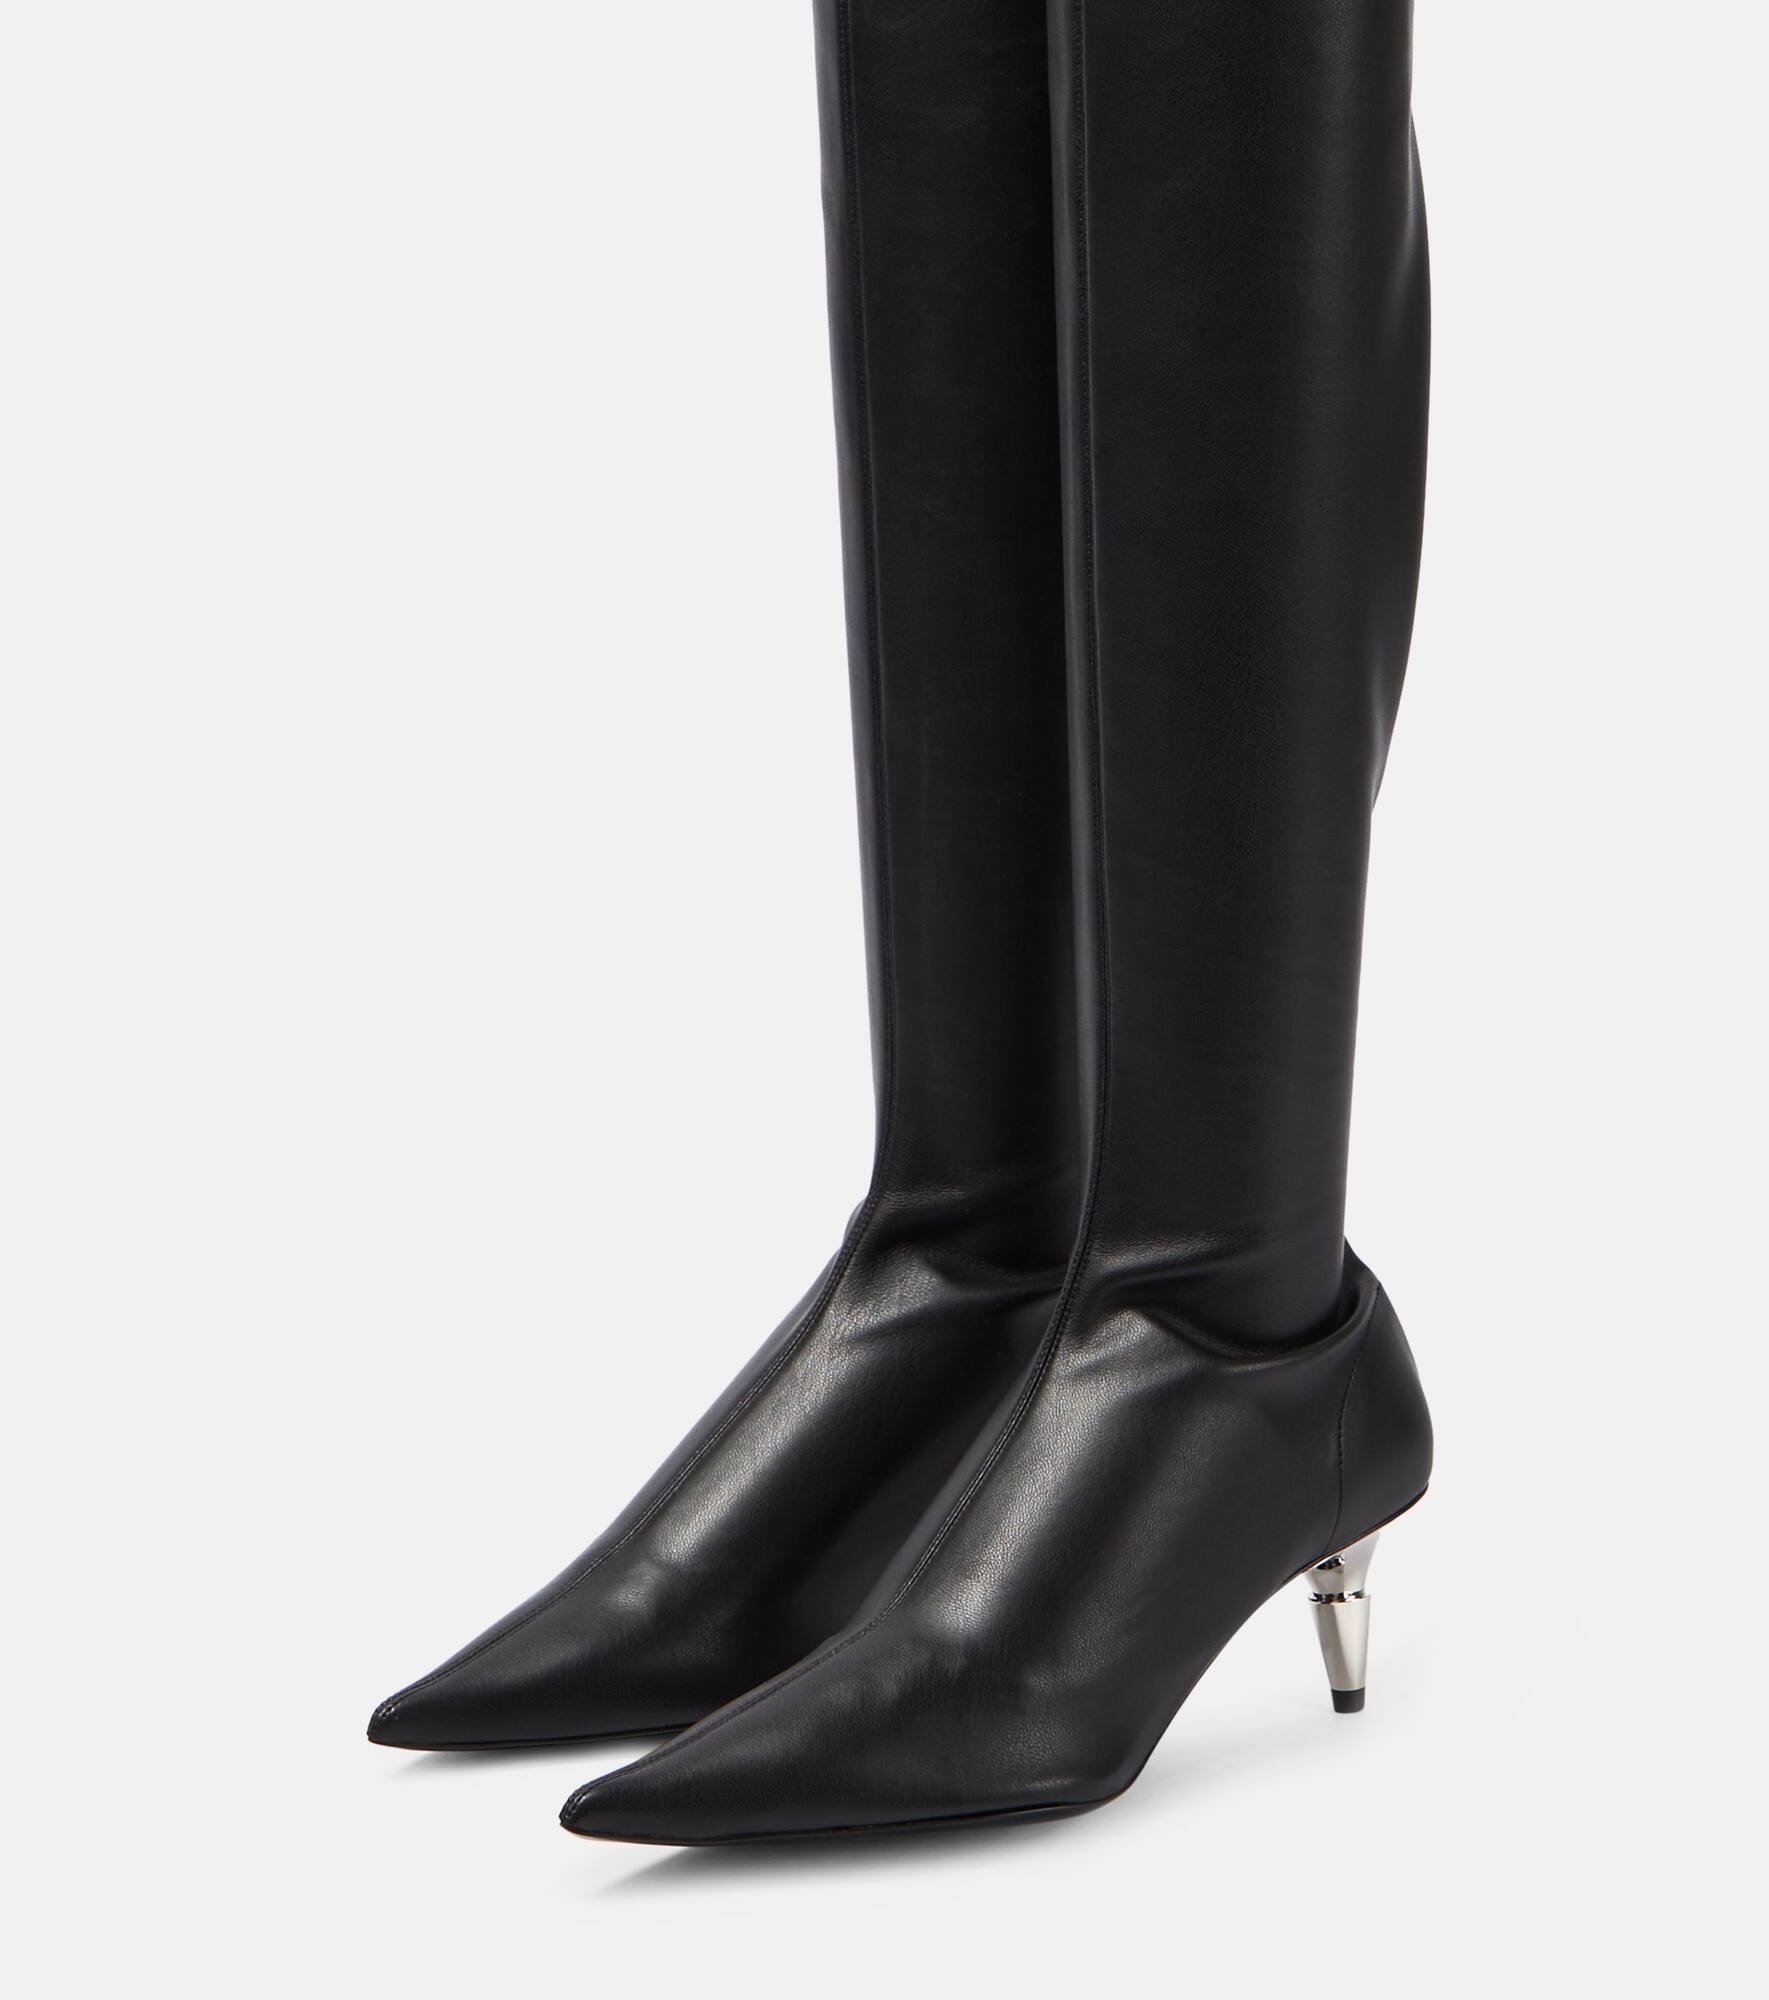 Spike leather over-the-knee boots - 5